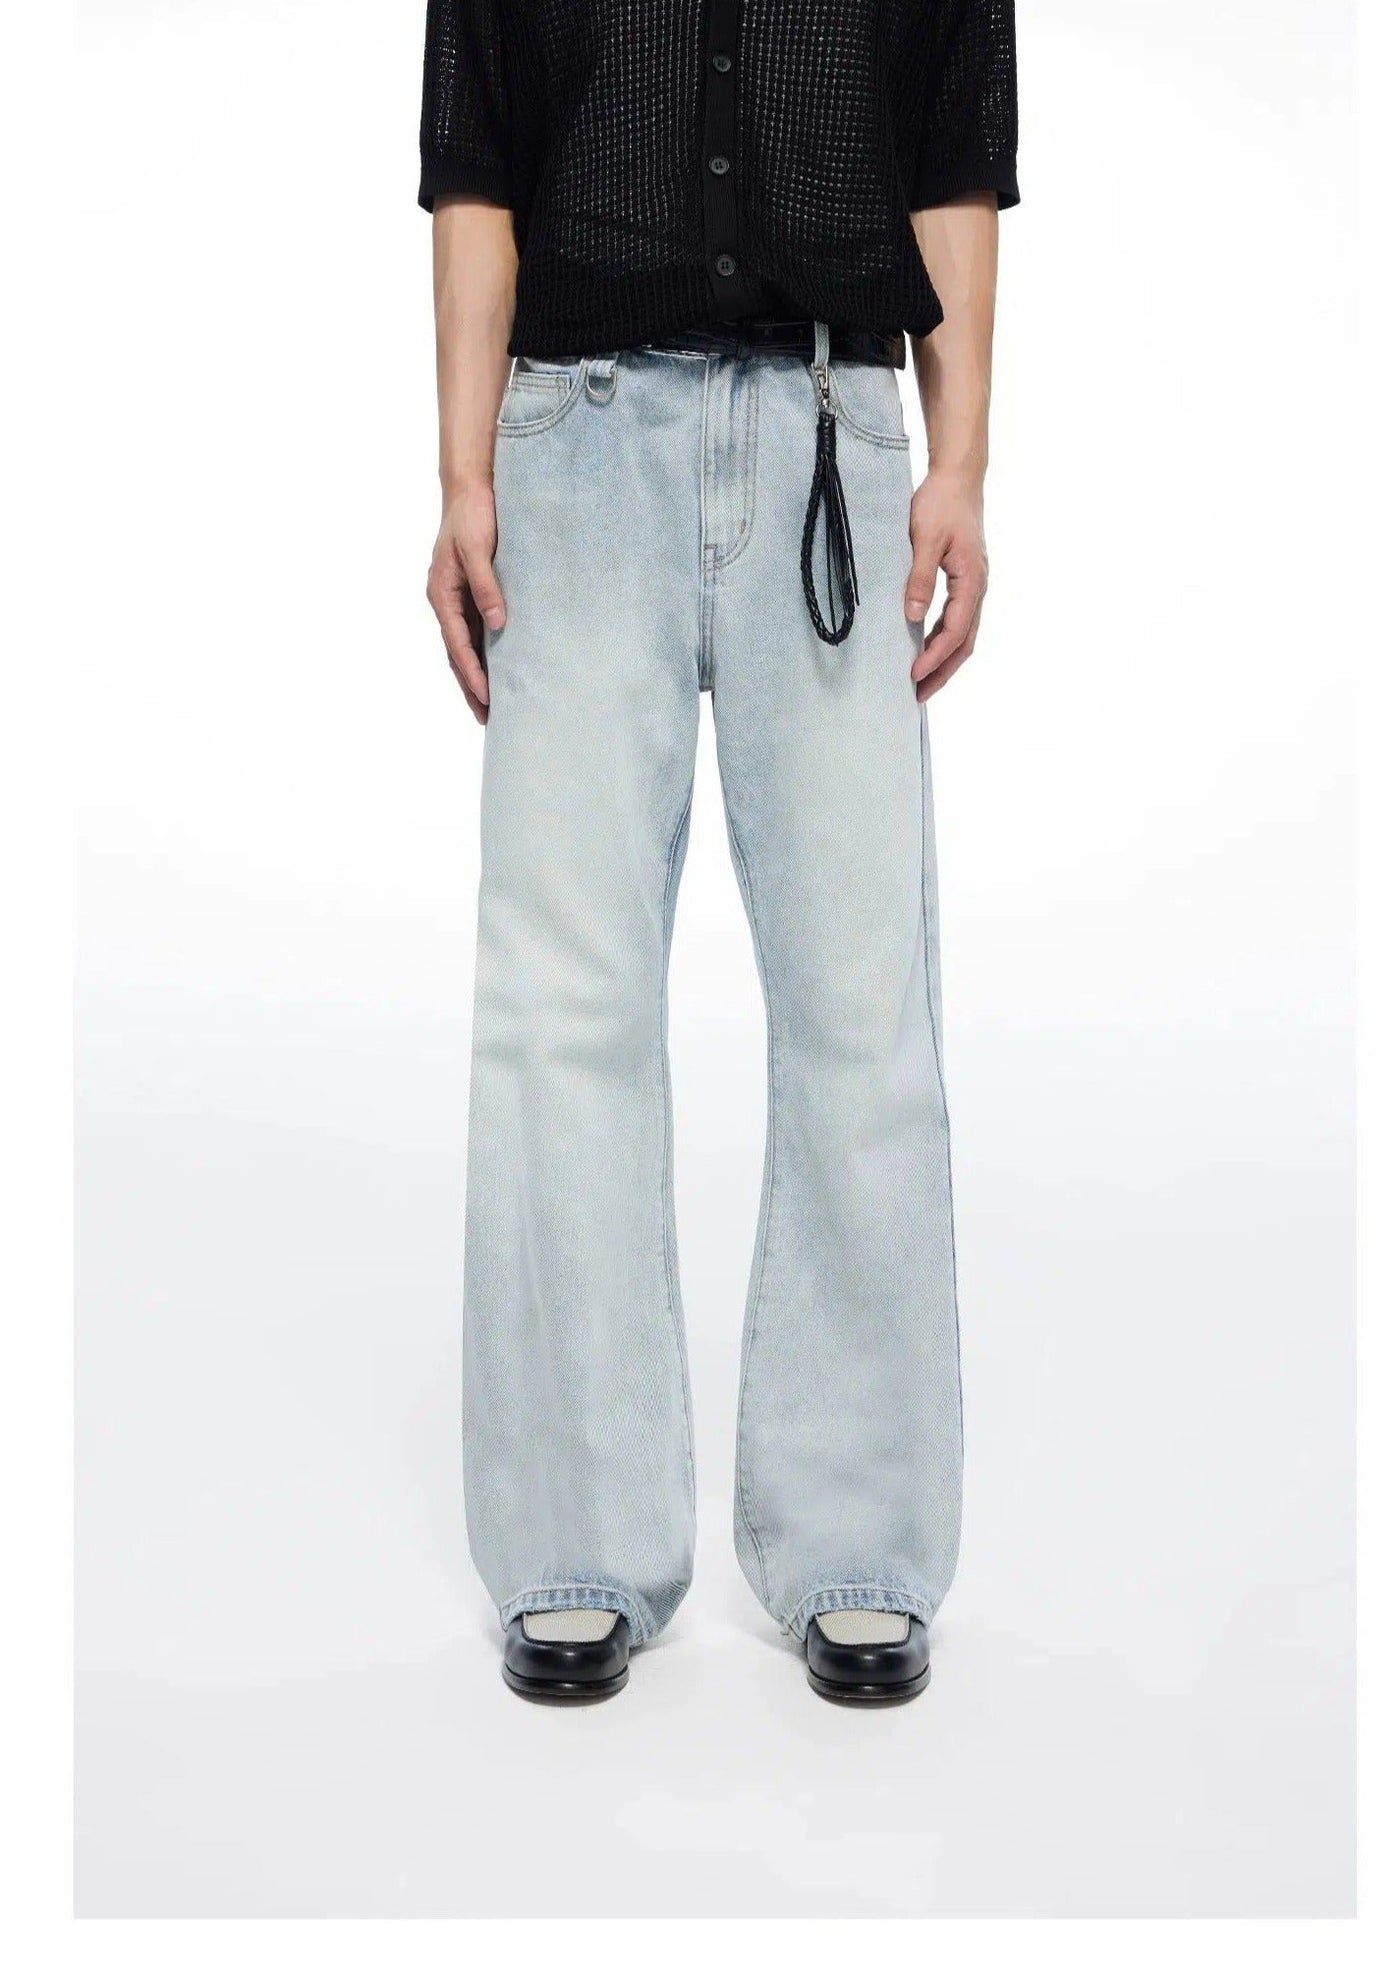 Light Washed Buttoned Jeans Korean Street Fashion Jeans By Terra Incognita Shop Online at OH Vault